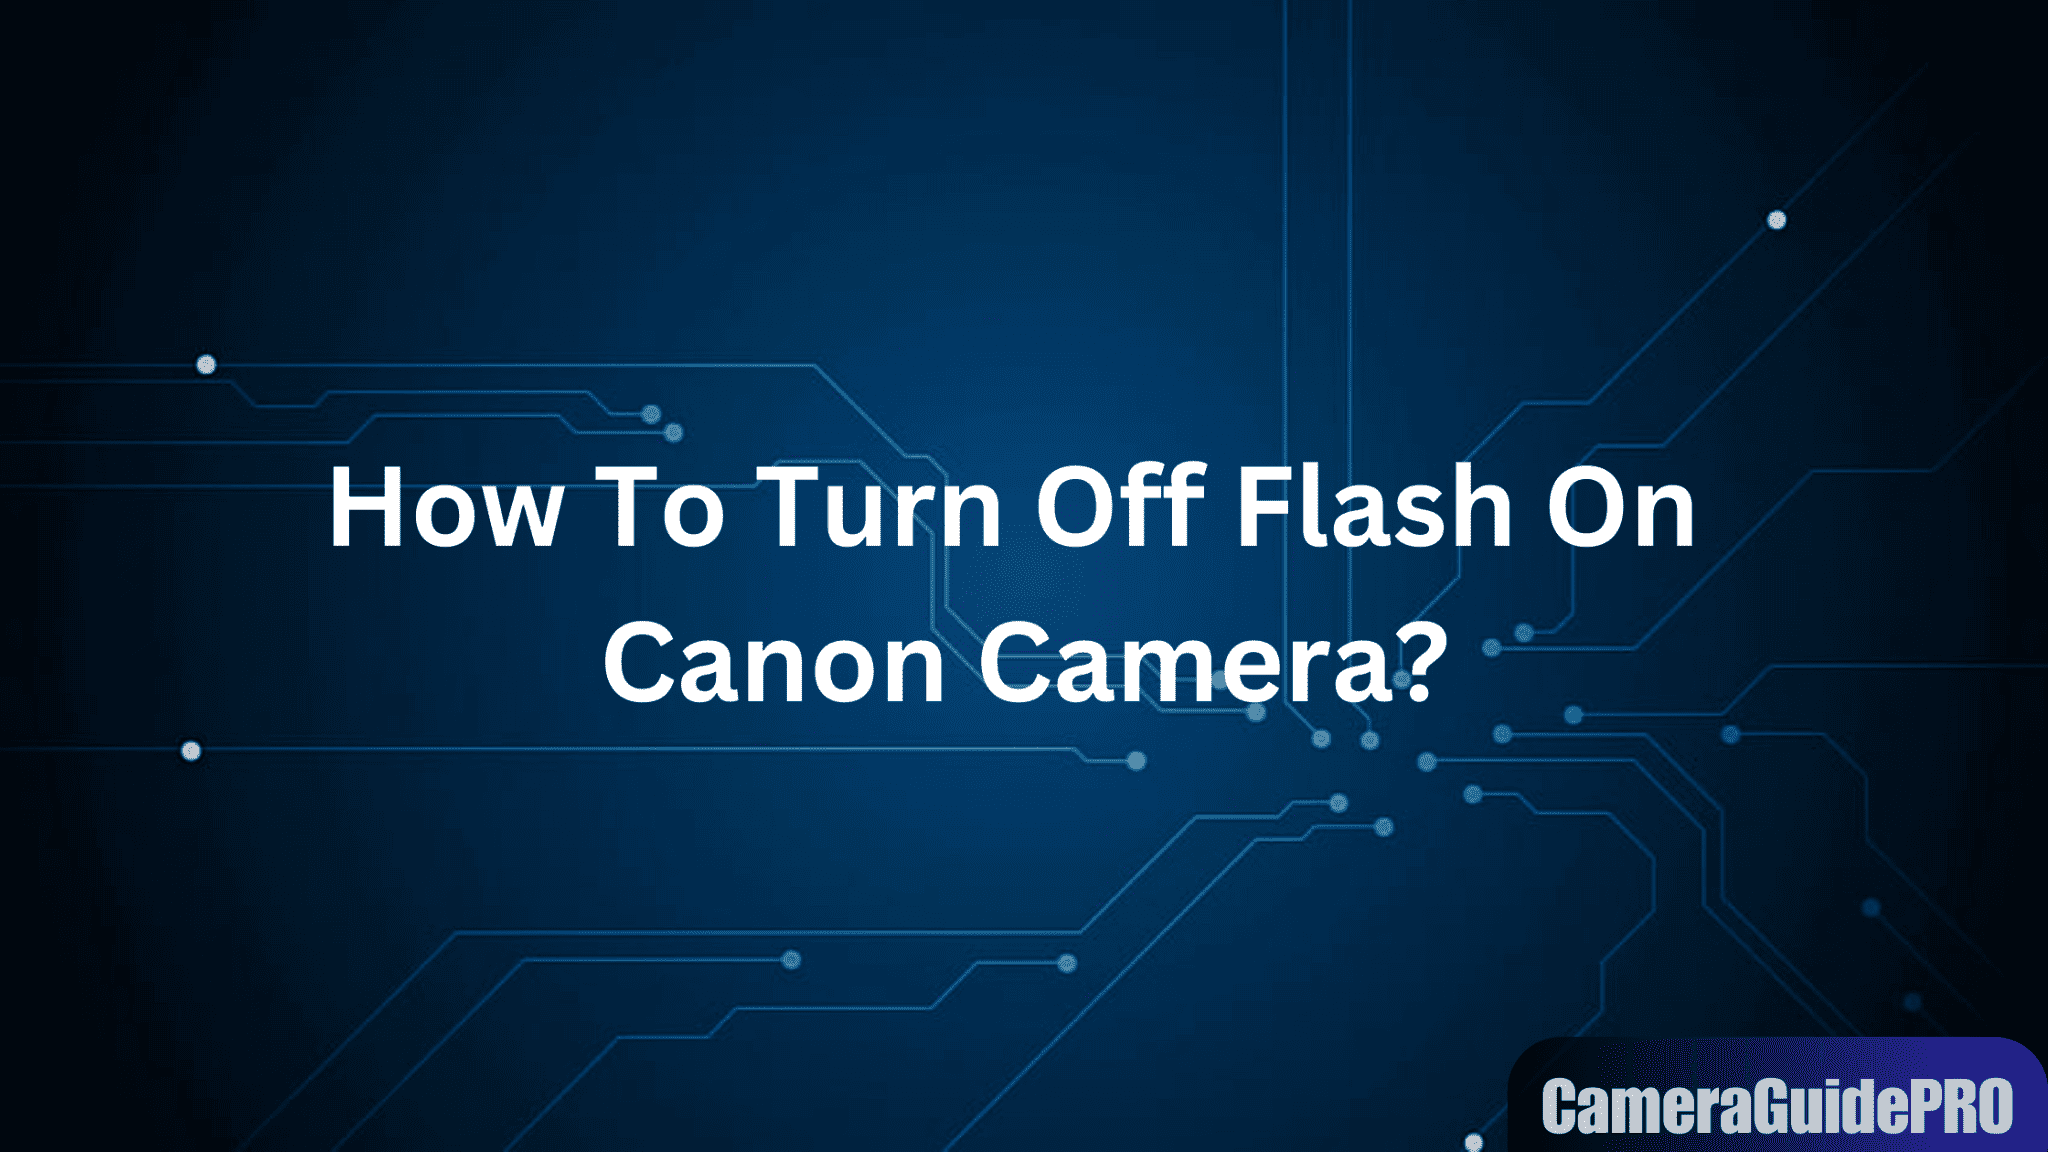 How To Turn Off Flash On Canon Camera